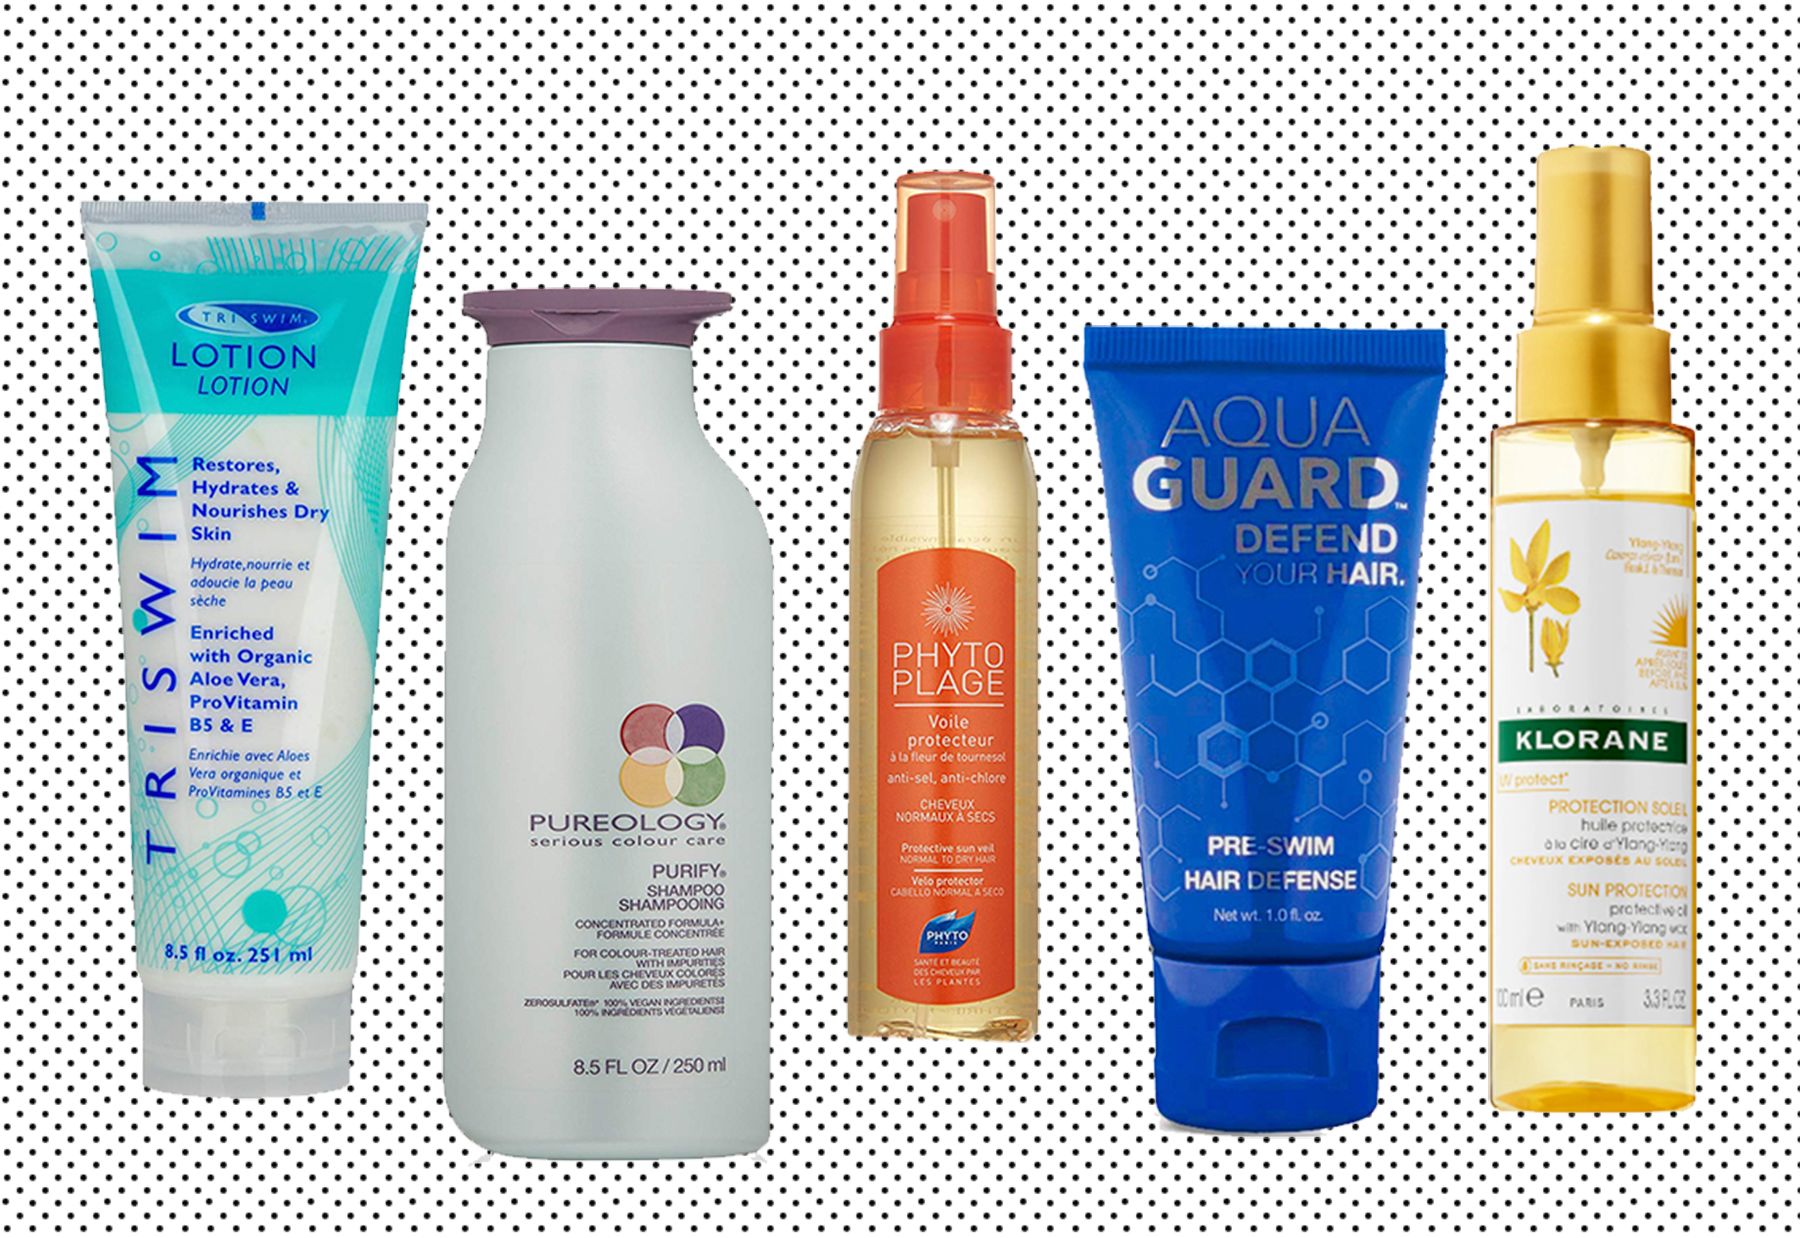 Best chlorine removal products to protect hair and skin | CNN Underscored